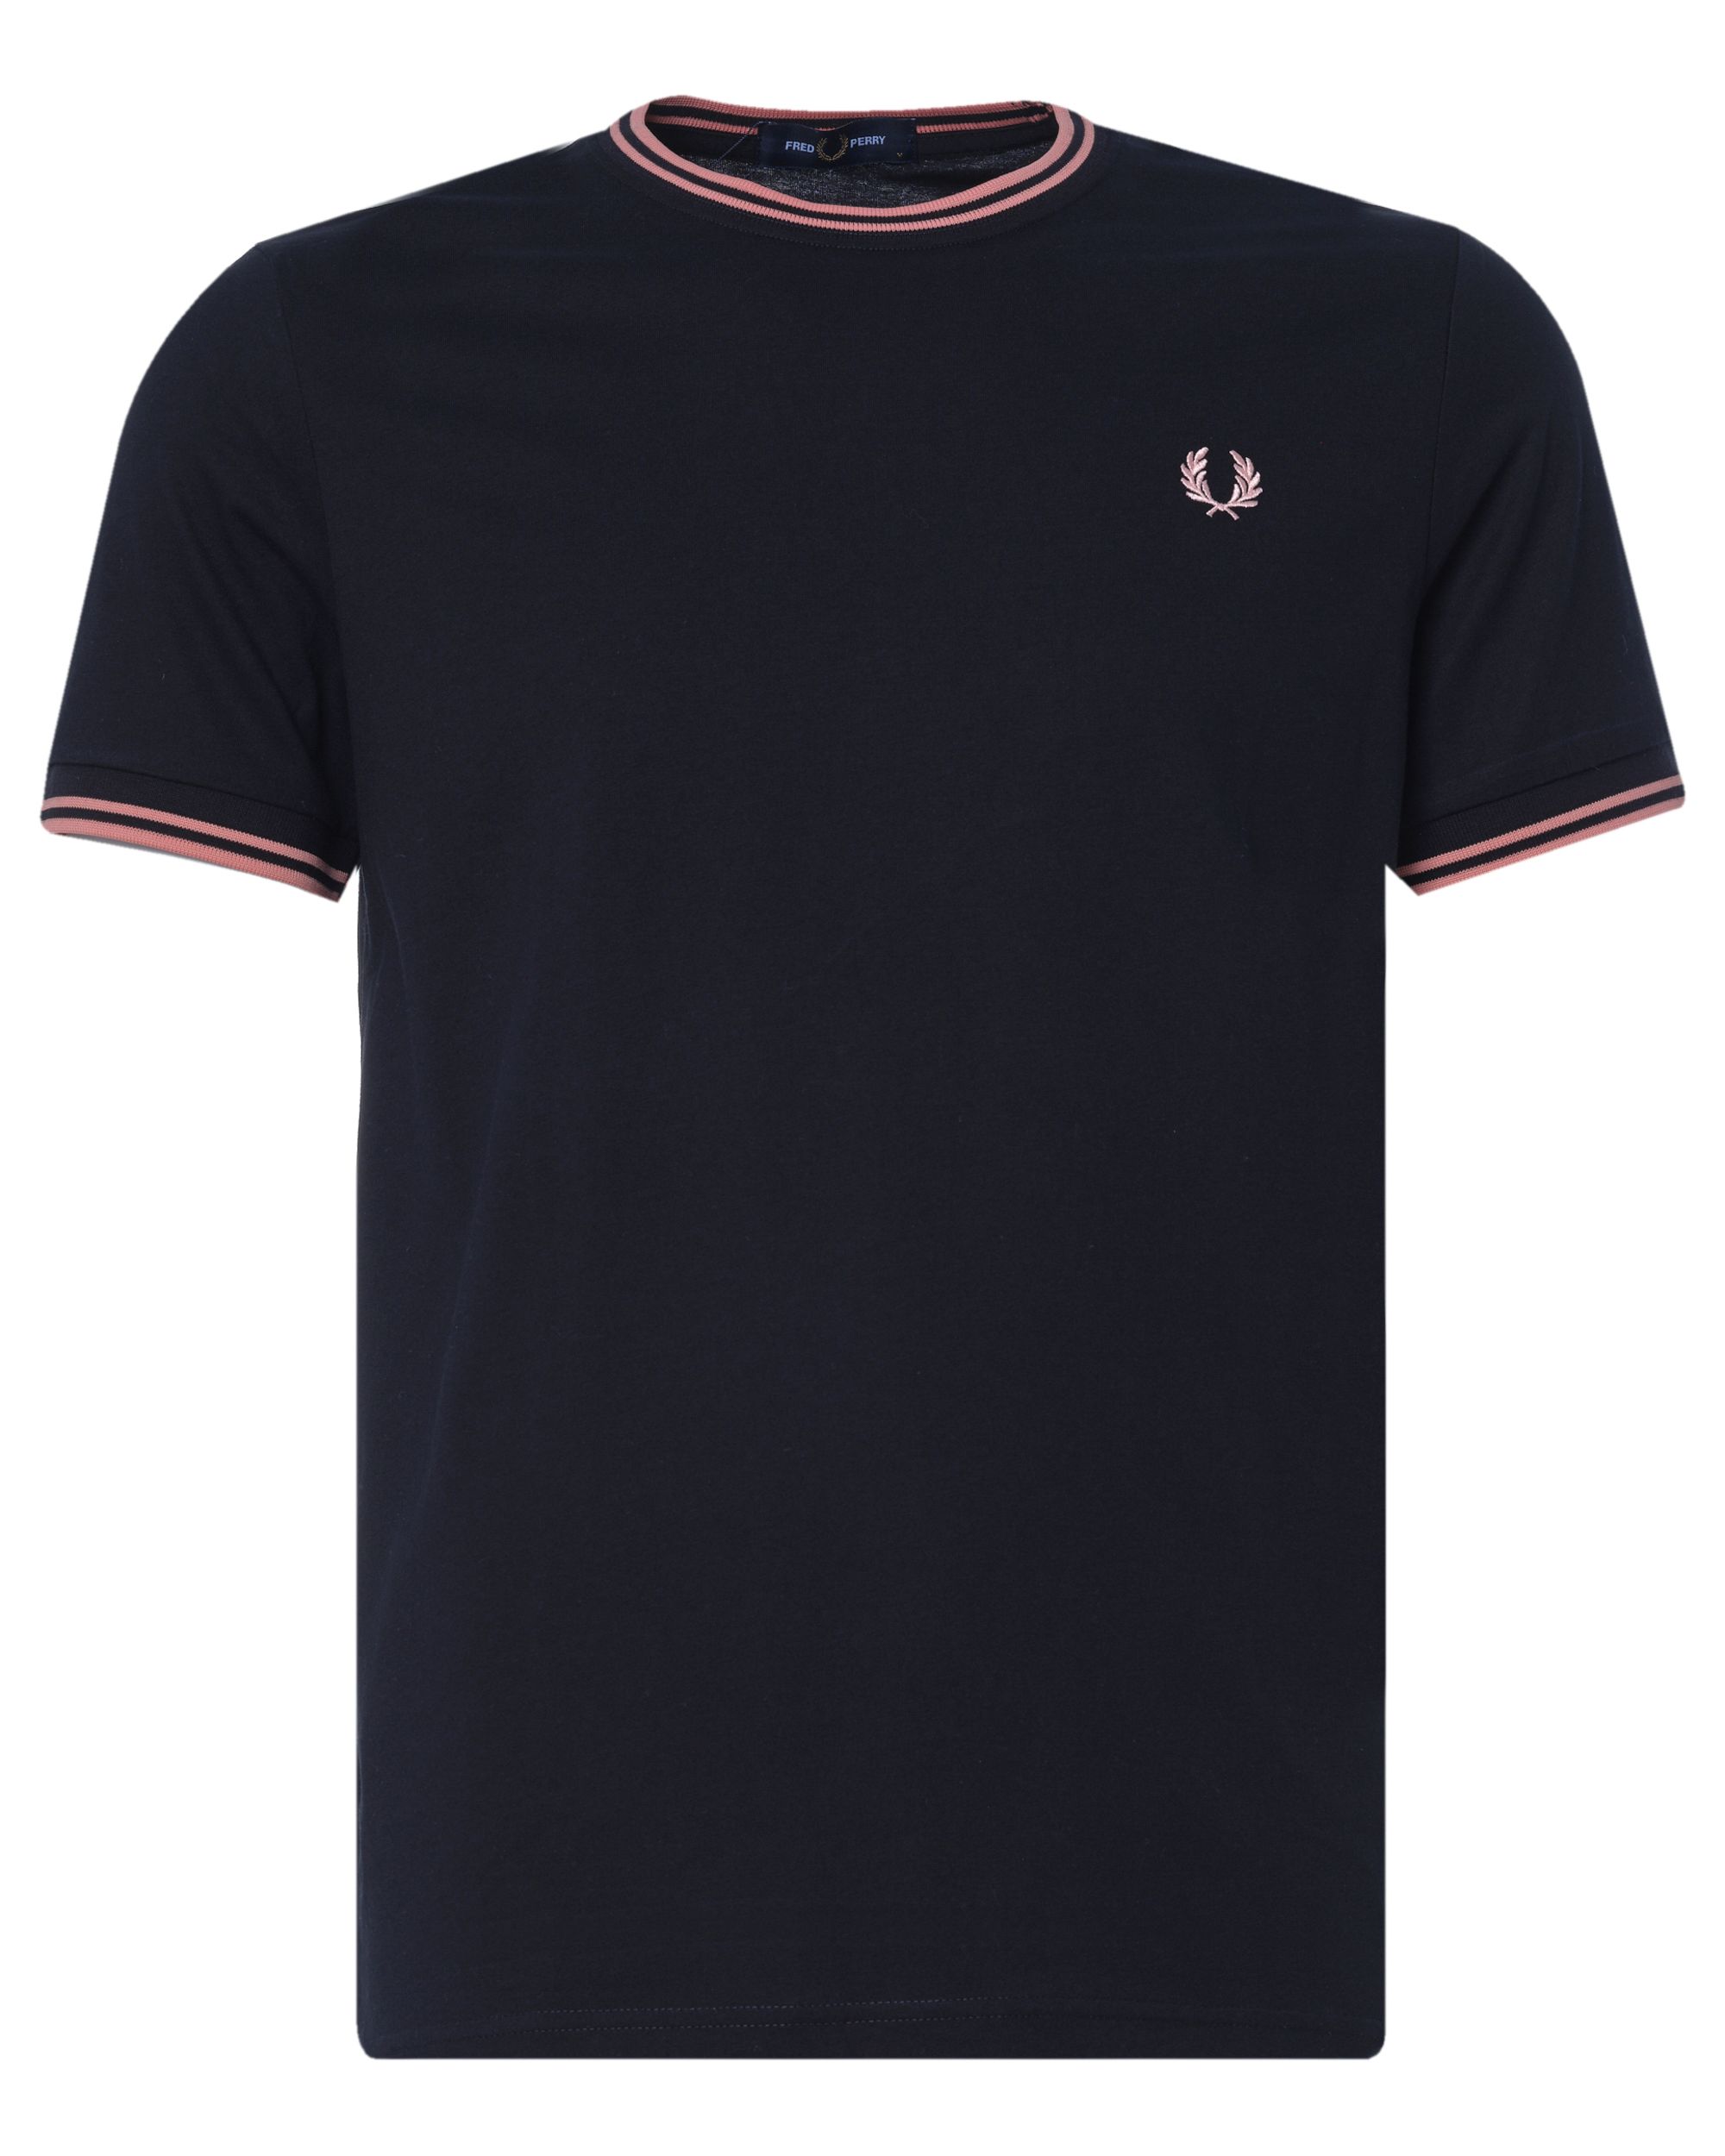 Fred Perry Twin Tipped T-shirt KM Zwart 078790-001-L